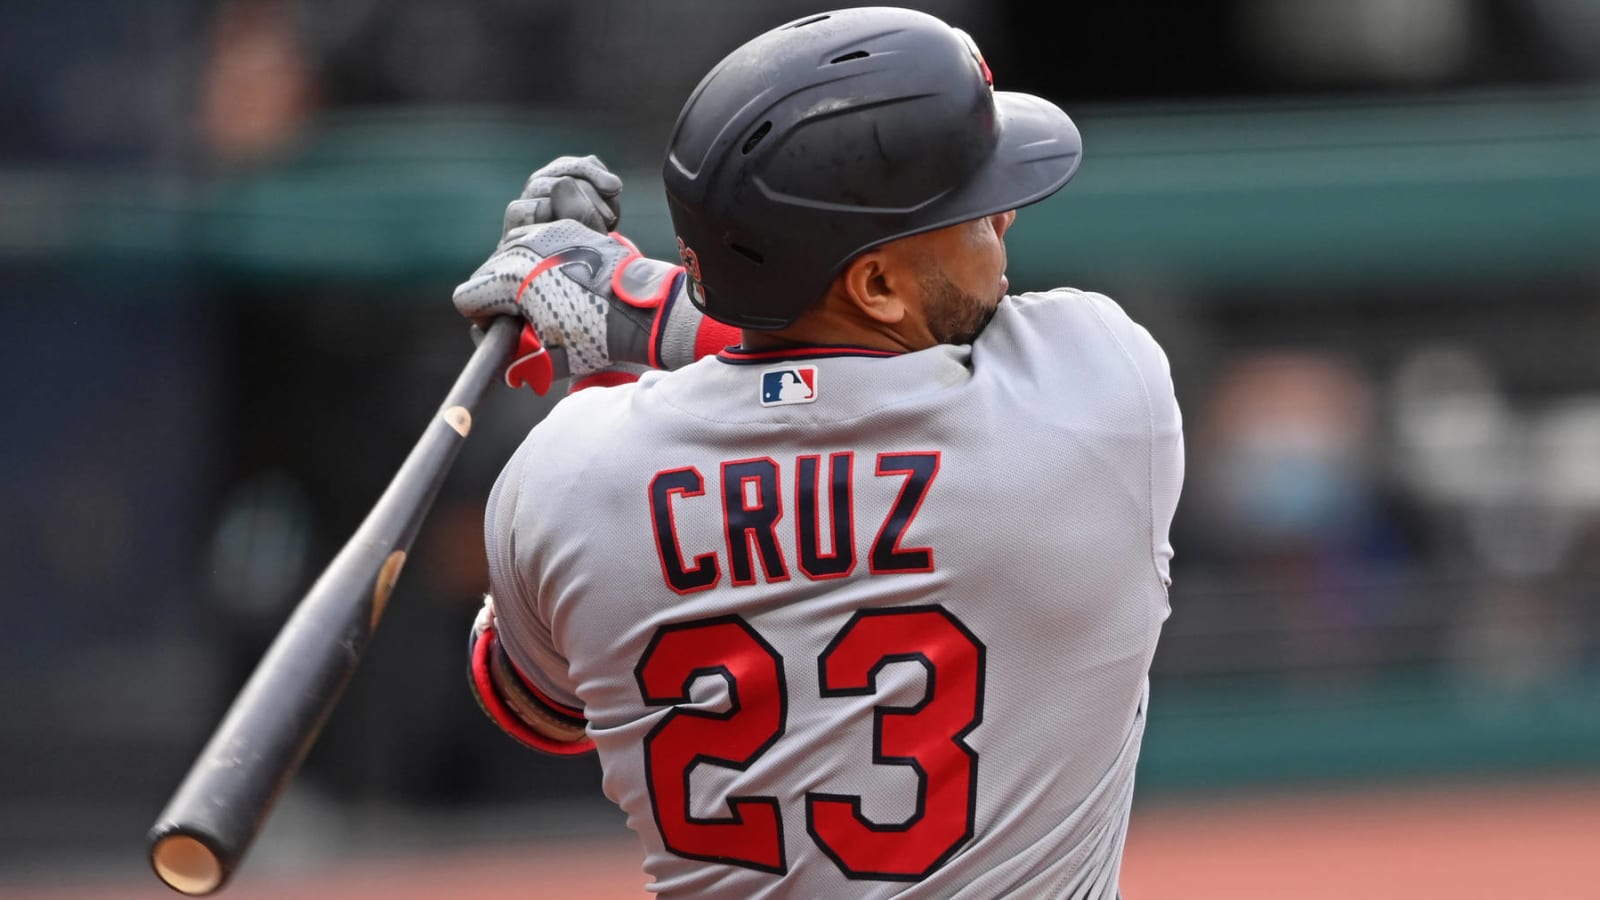 Nelson Cruz had to pay up to wear No. 23 for Rays